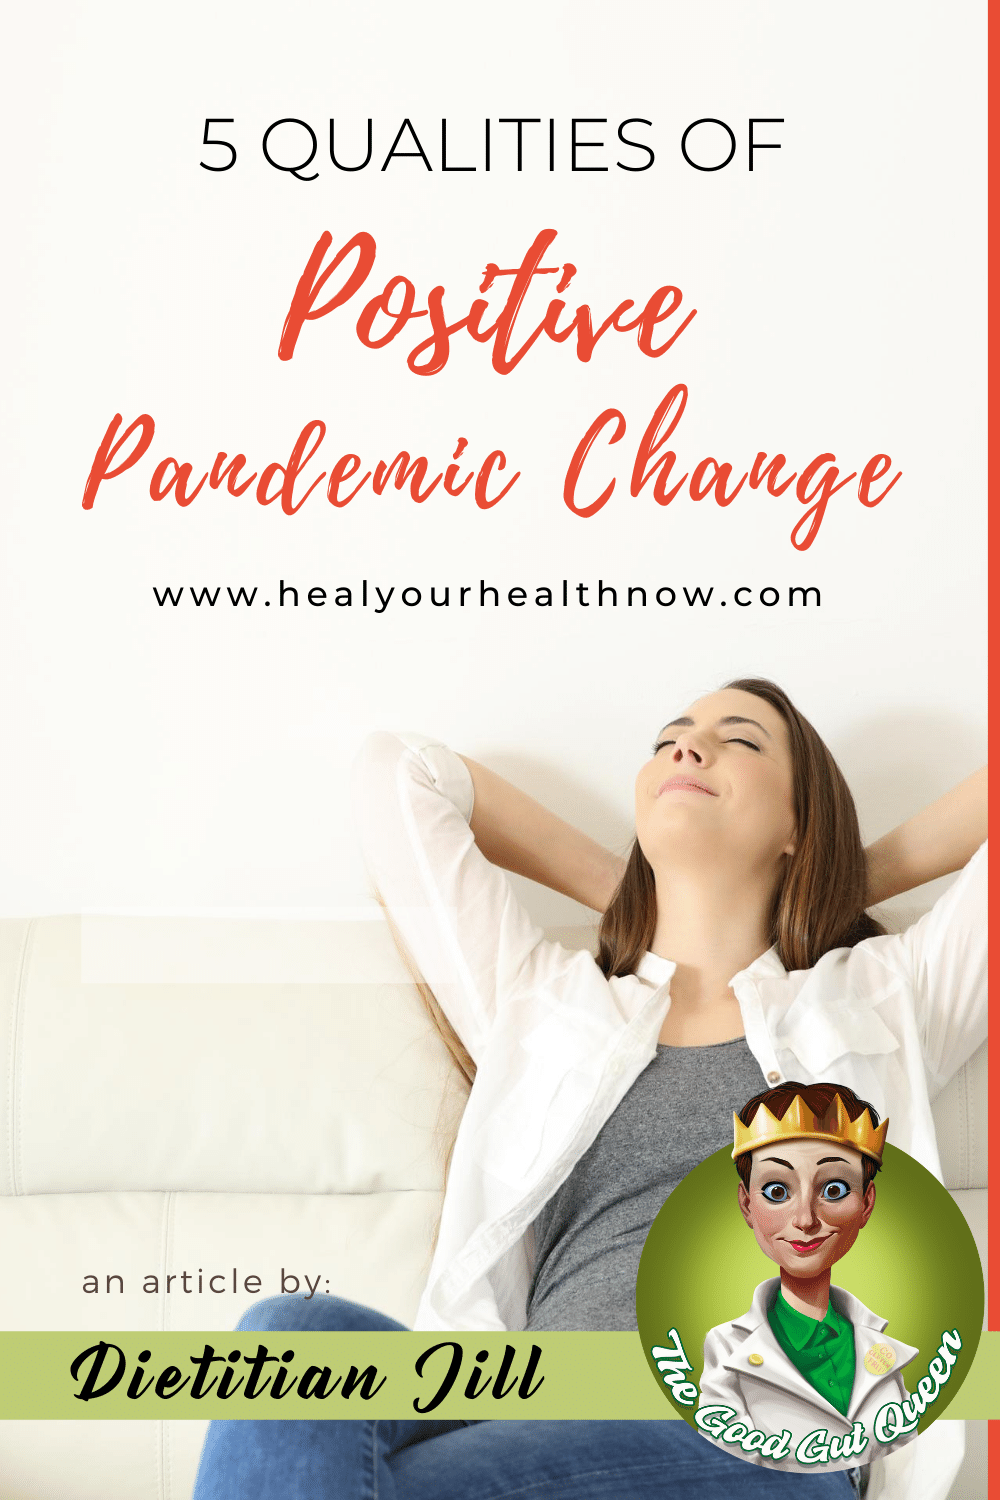 5 Qualities of Positive Pandemic Change